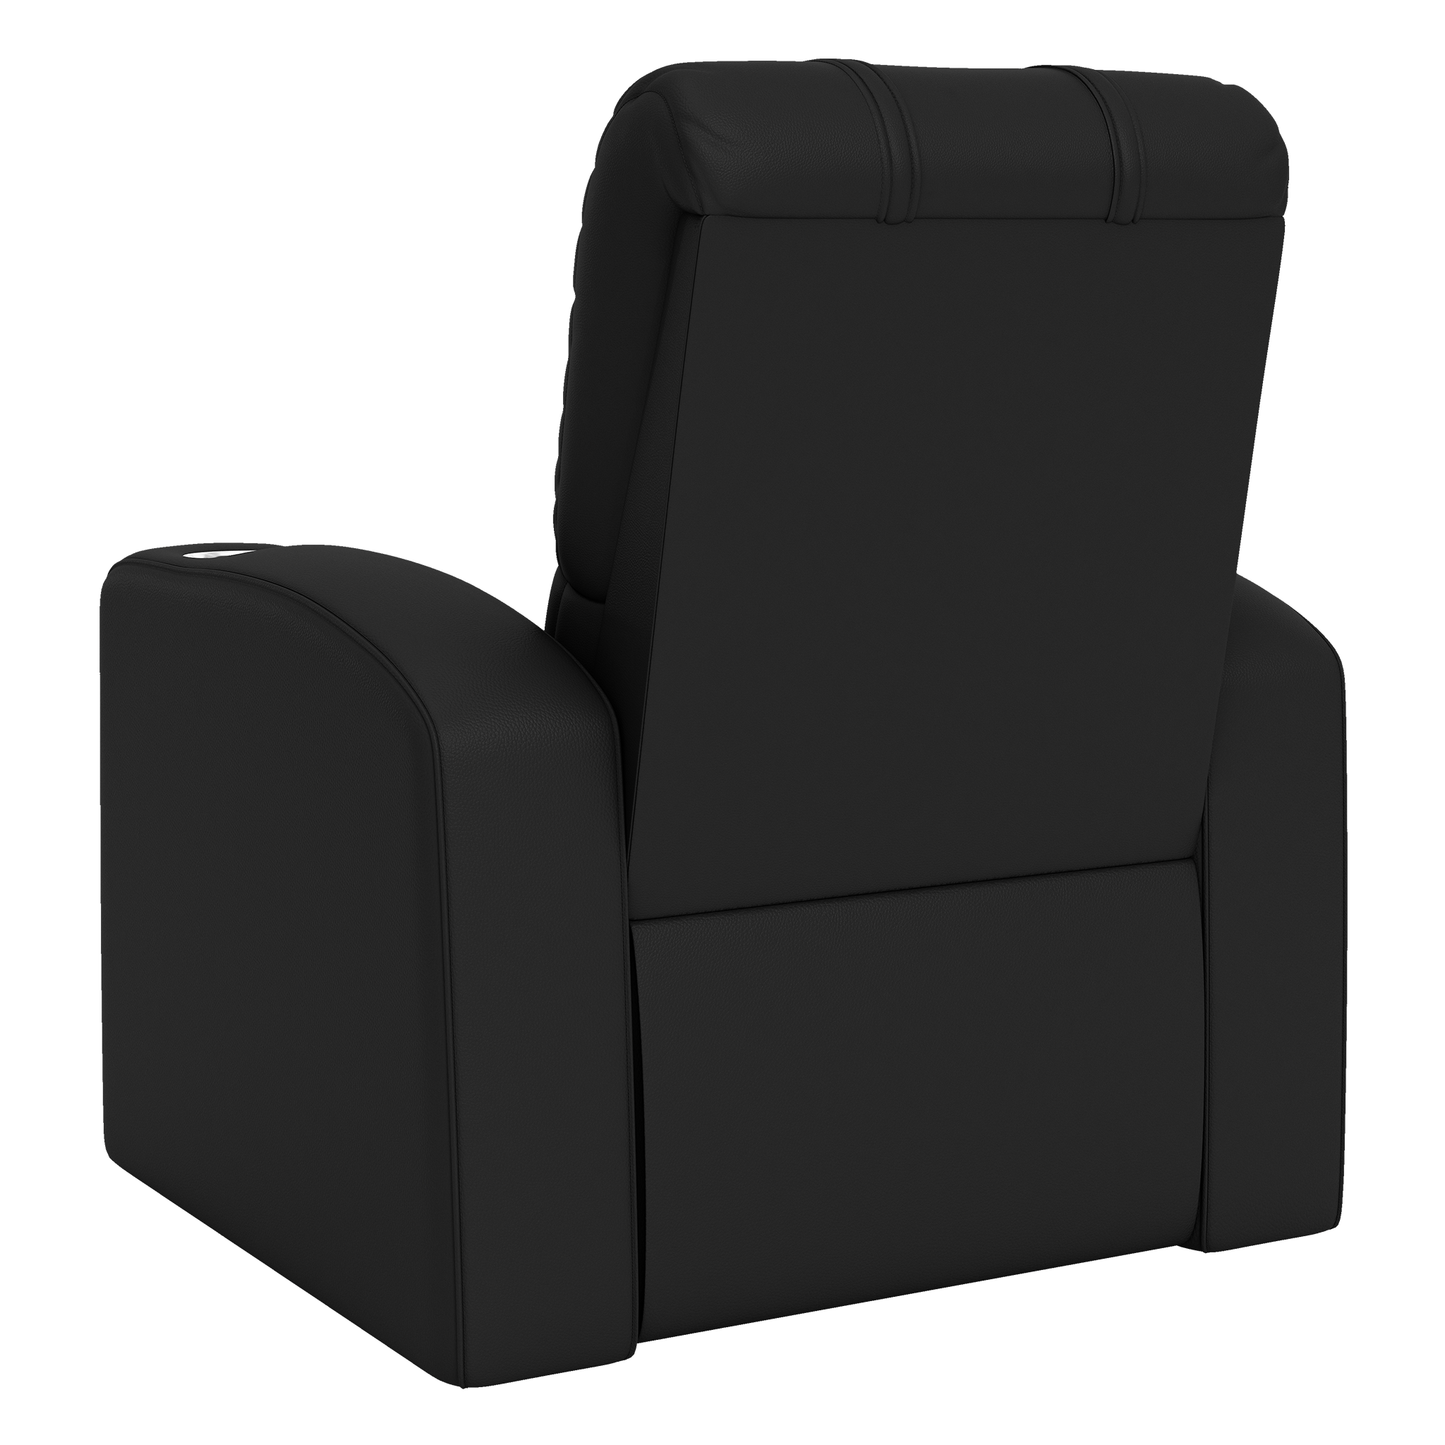 Relax Home Theater Recliner with Sporting Kansas City Logo